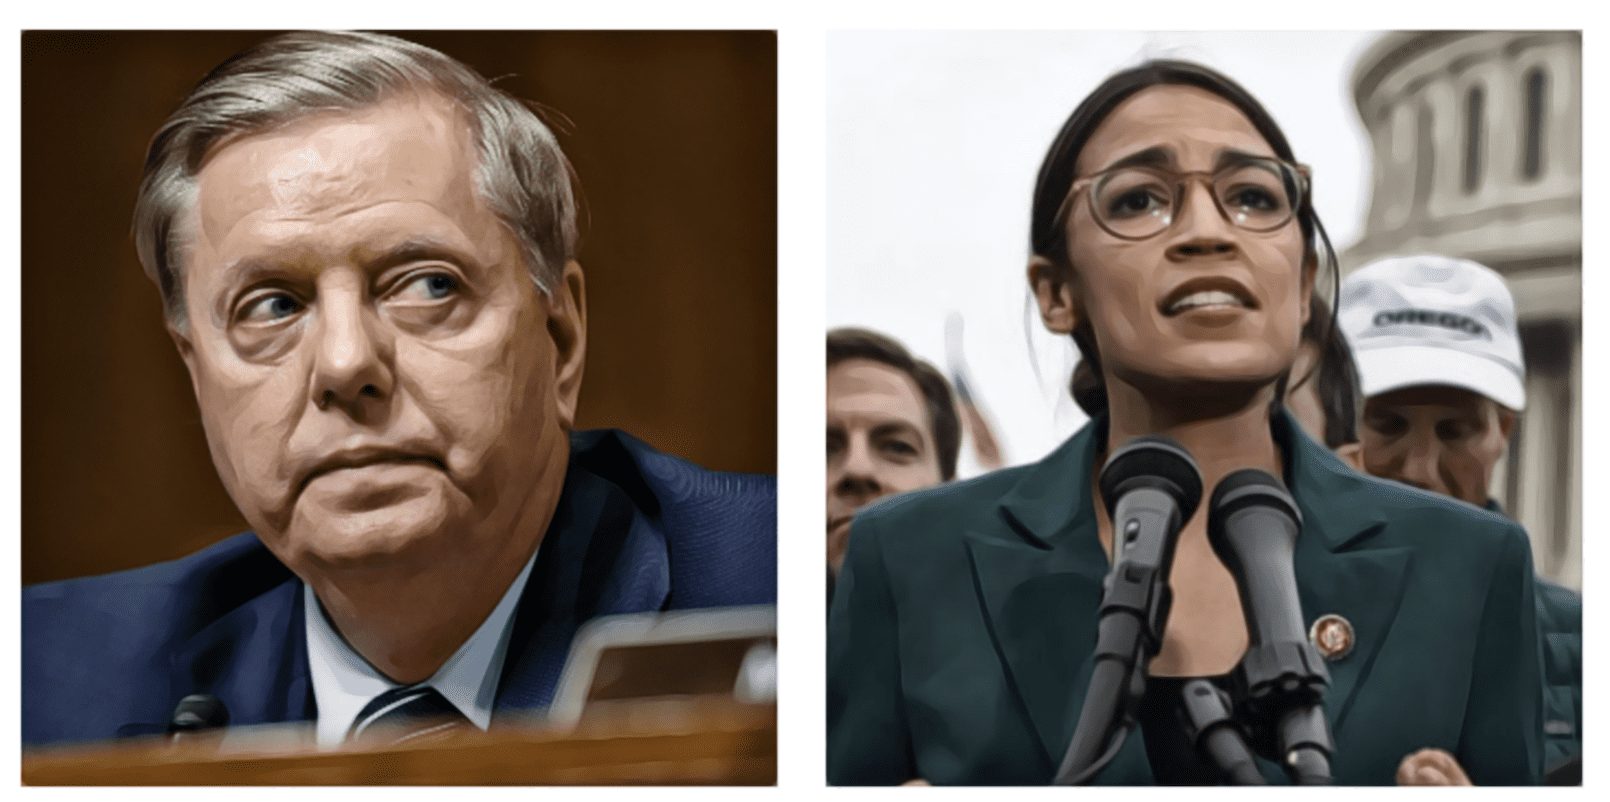 Lindsey Graham Just Wiped The Smile Off AOC’s Face: “Let’s Vote On The New Green ...